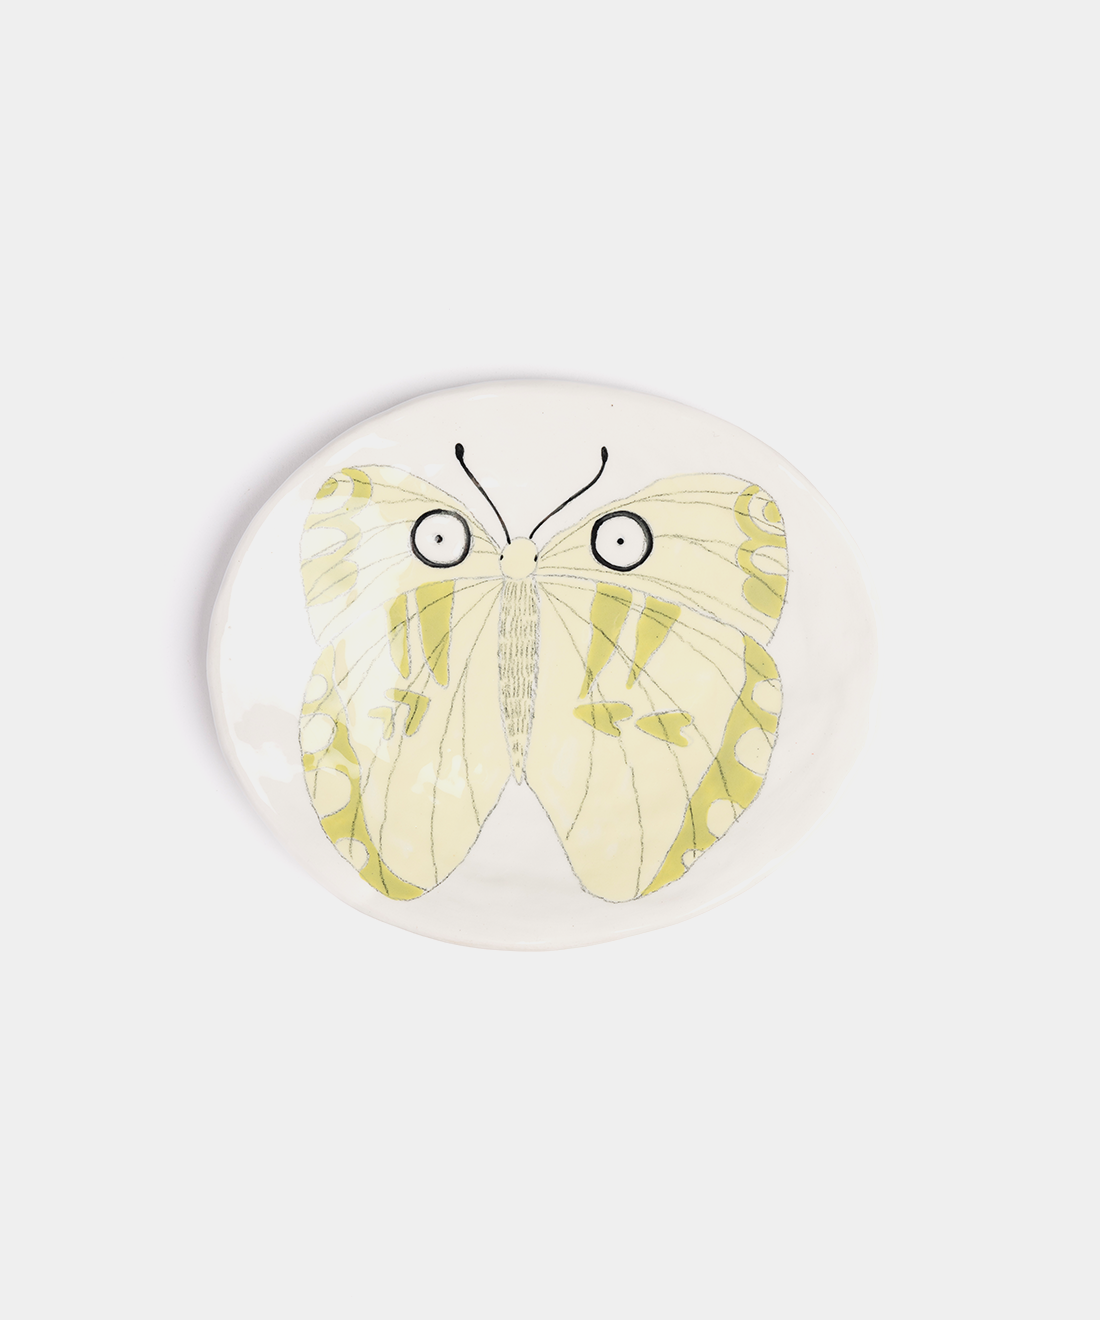 Small Butterfly Ceramic Plates, 6